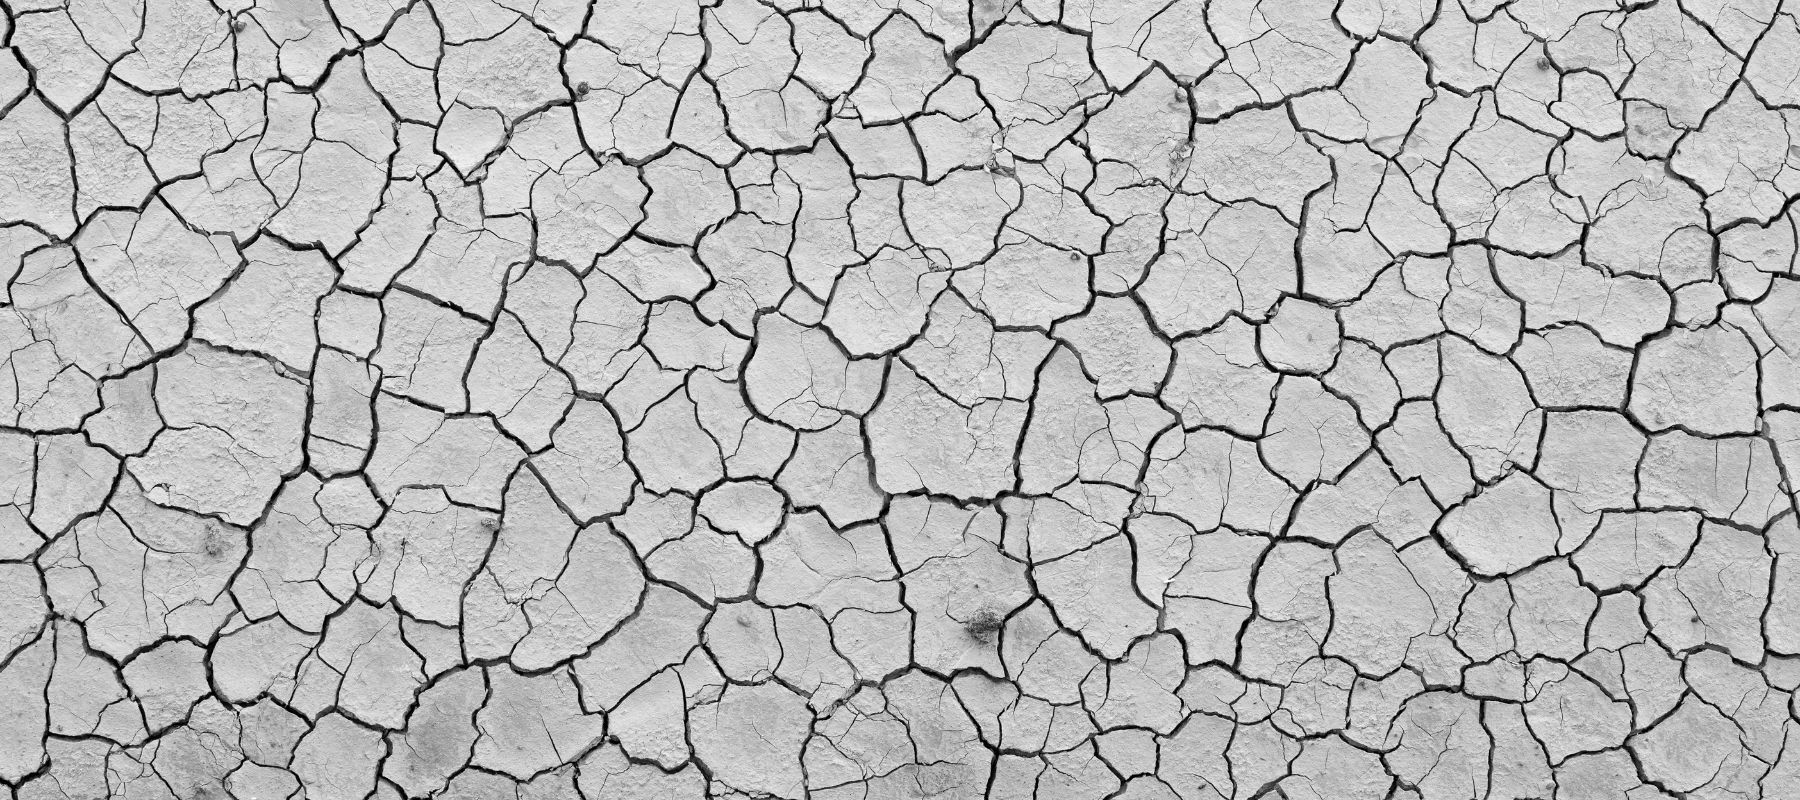 close-up of dry surface, resembling the effect of hard water on skim and hair